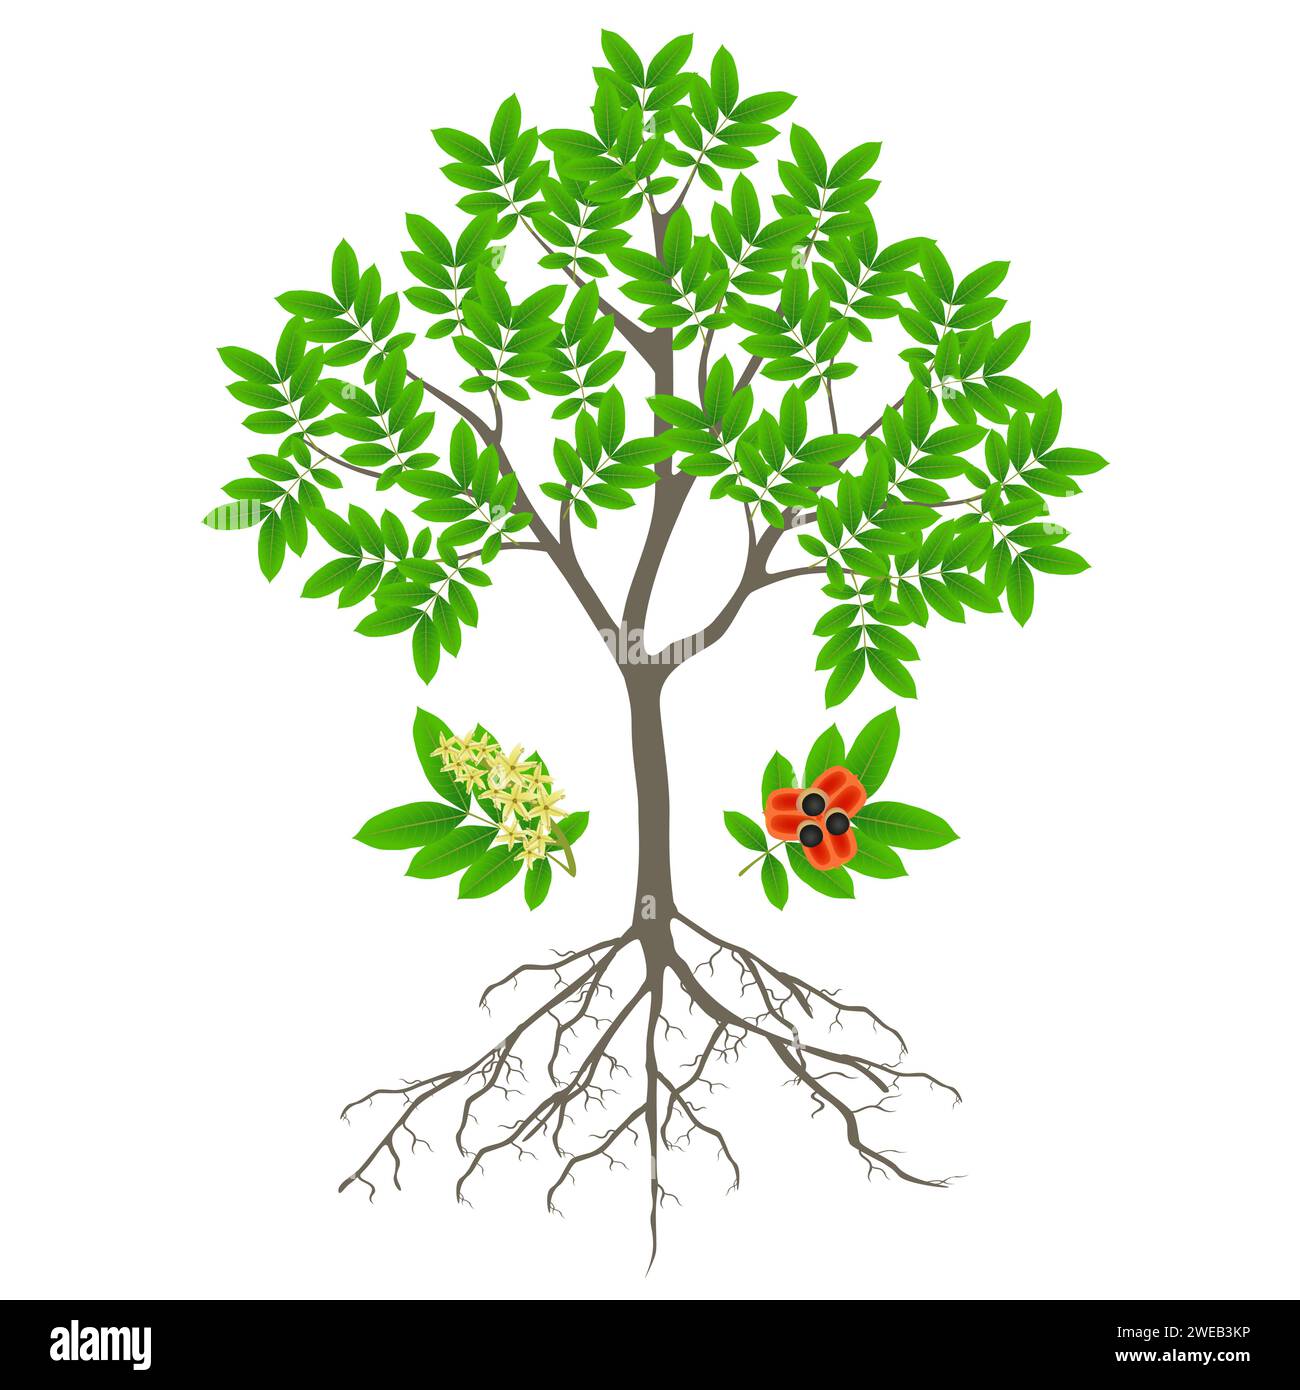 Ackee tree with fruits and flowers on a white background. Stock Vector